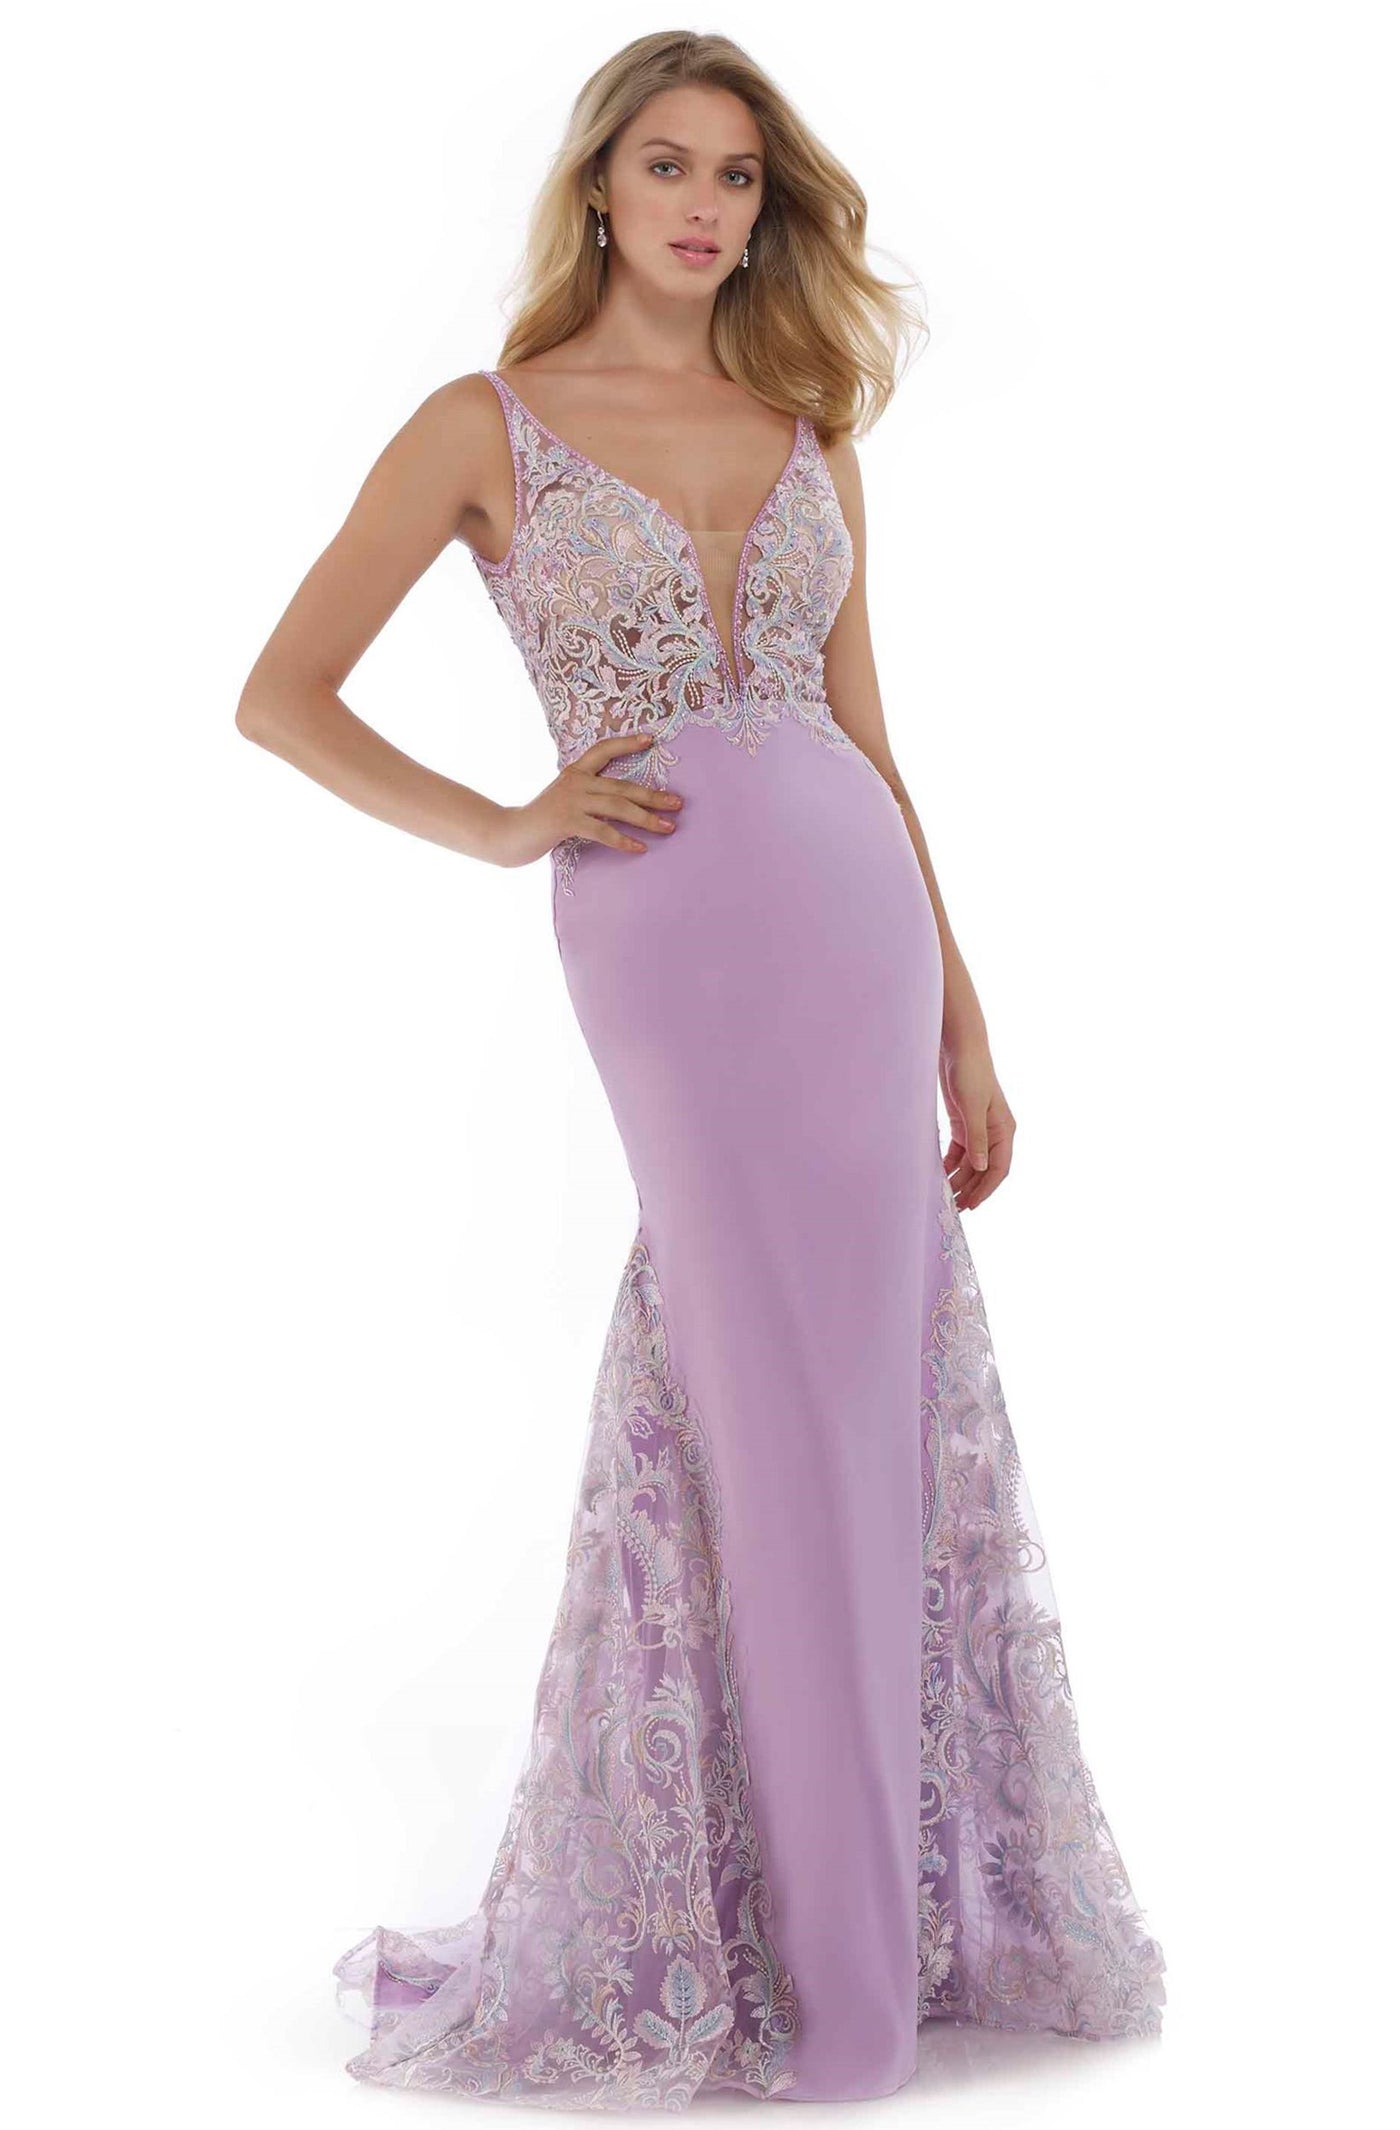 Morrell Maxie - 16098 Embroidered Deep V-neck Mermaid Dress in Purple